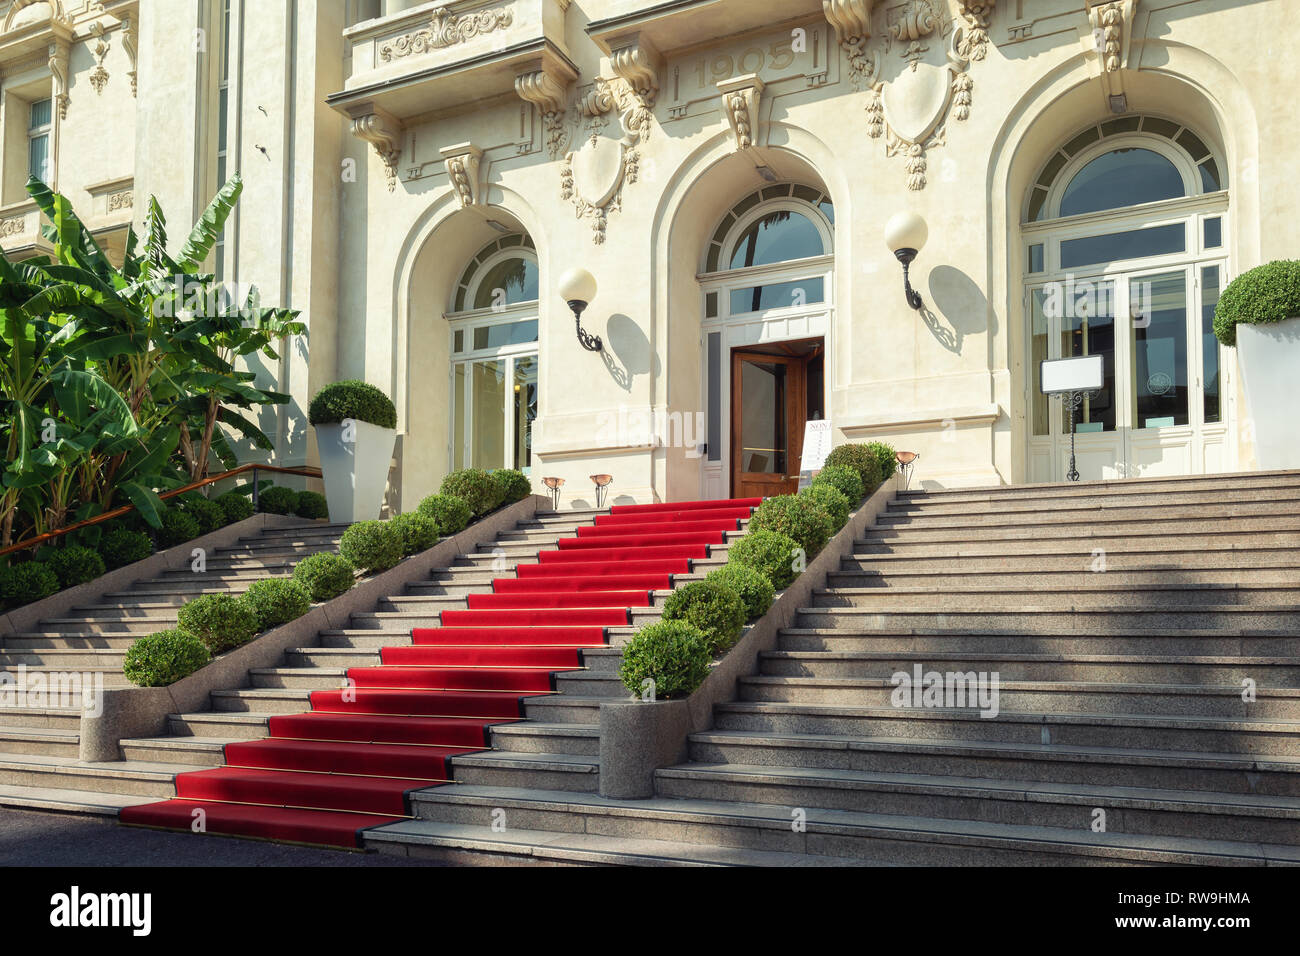 San Remo, Italy, September 18, 2018:  The red carpet in front of the entrance of the famous Casino in San Remo Stock Photo